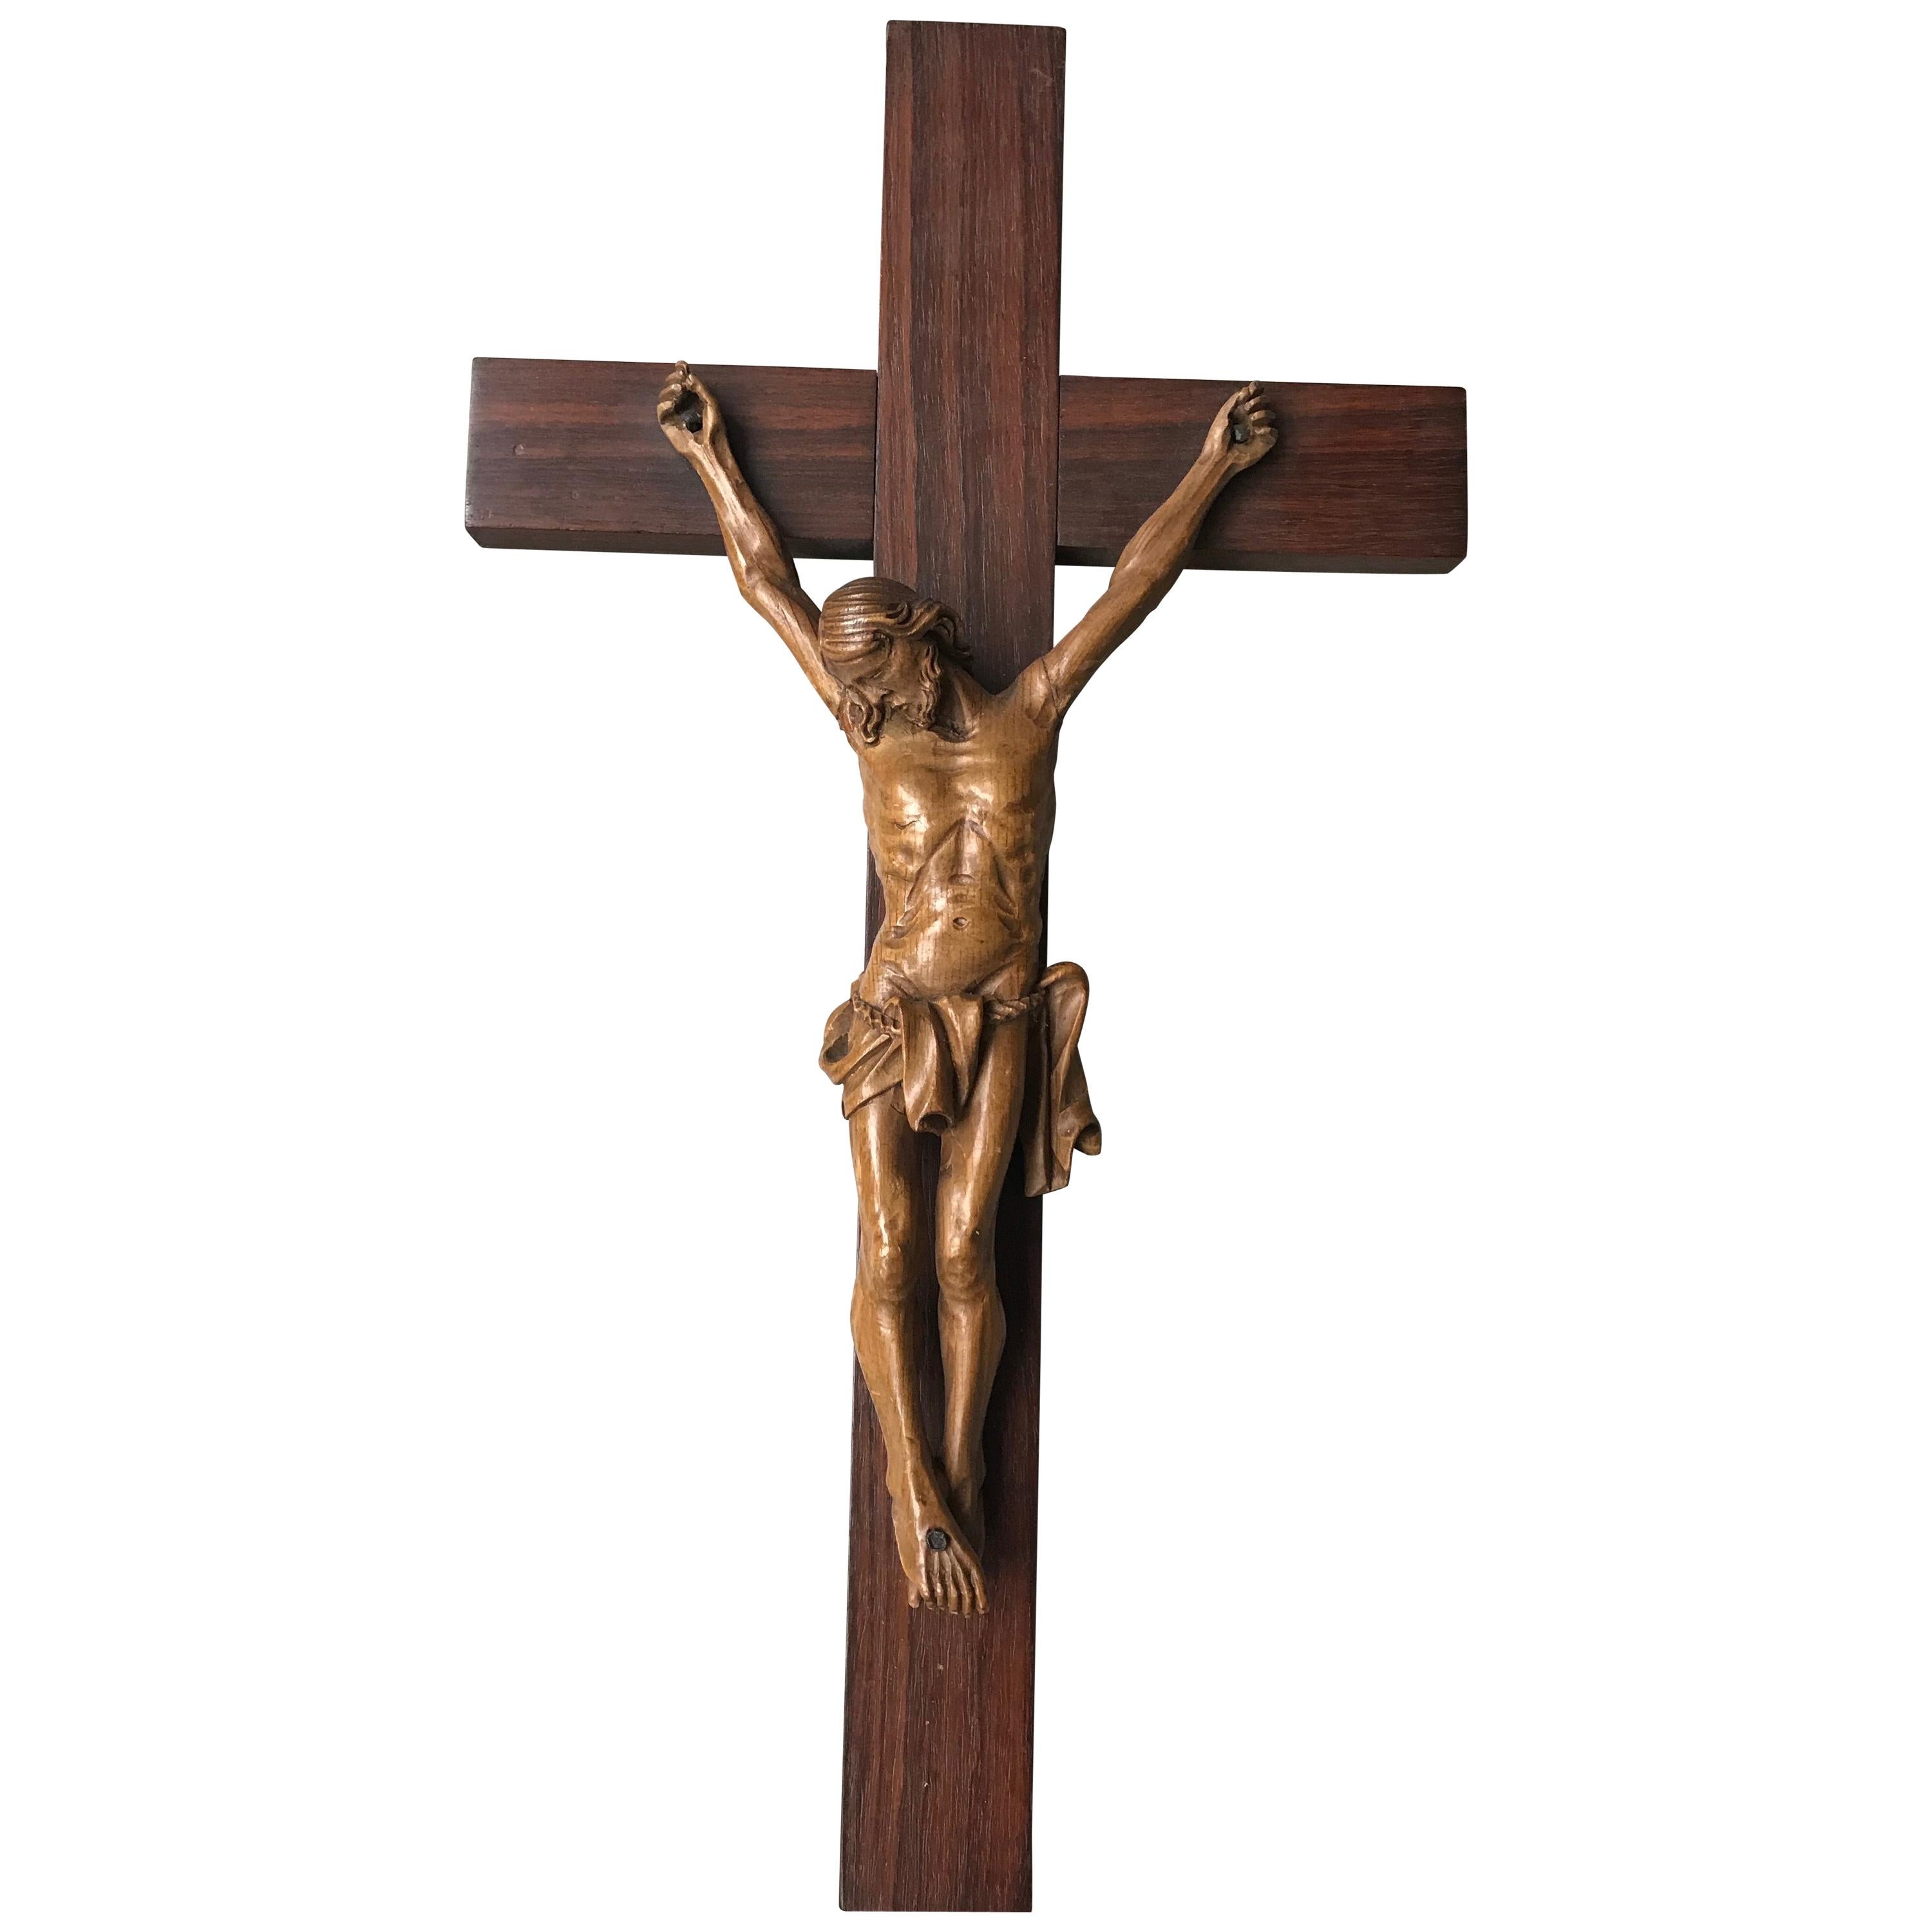 Antique Practical Size, Handcrafted Christ on wooden Cross Home Wall Crucifix